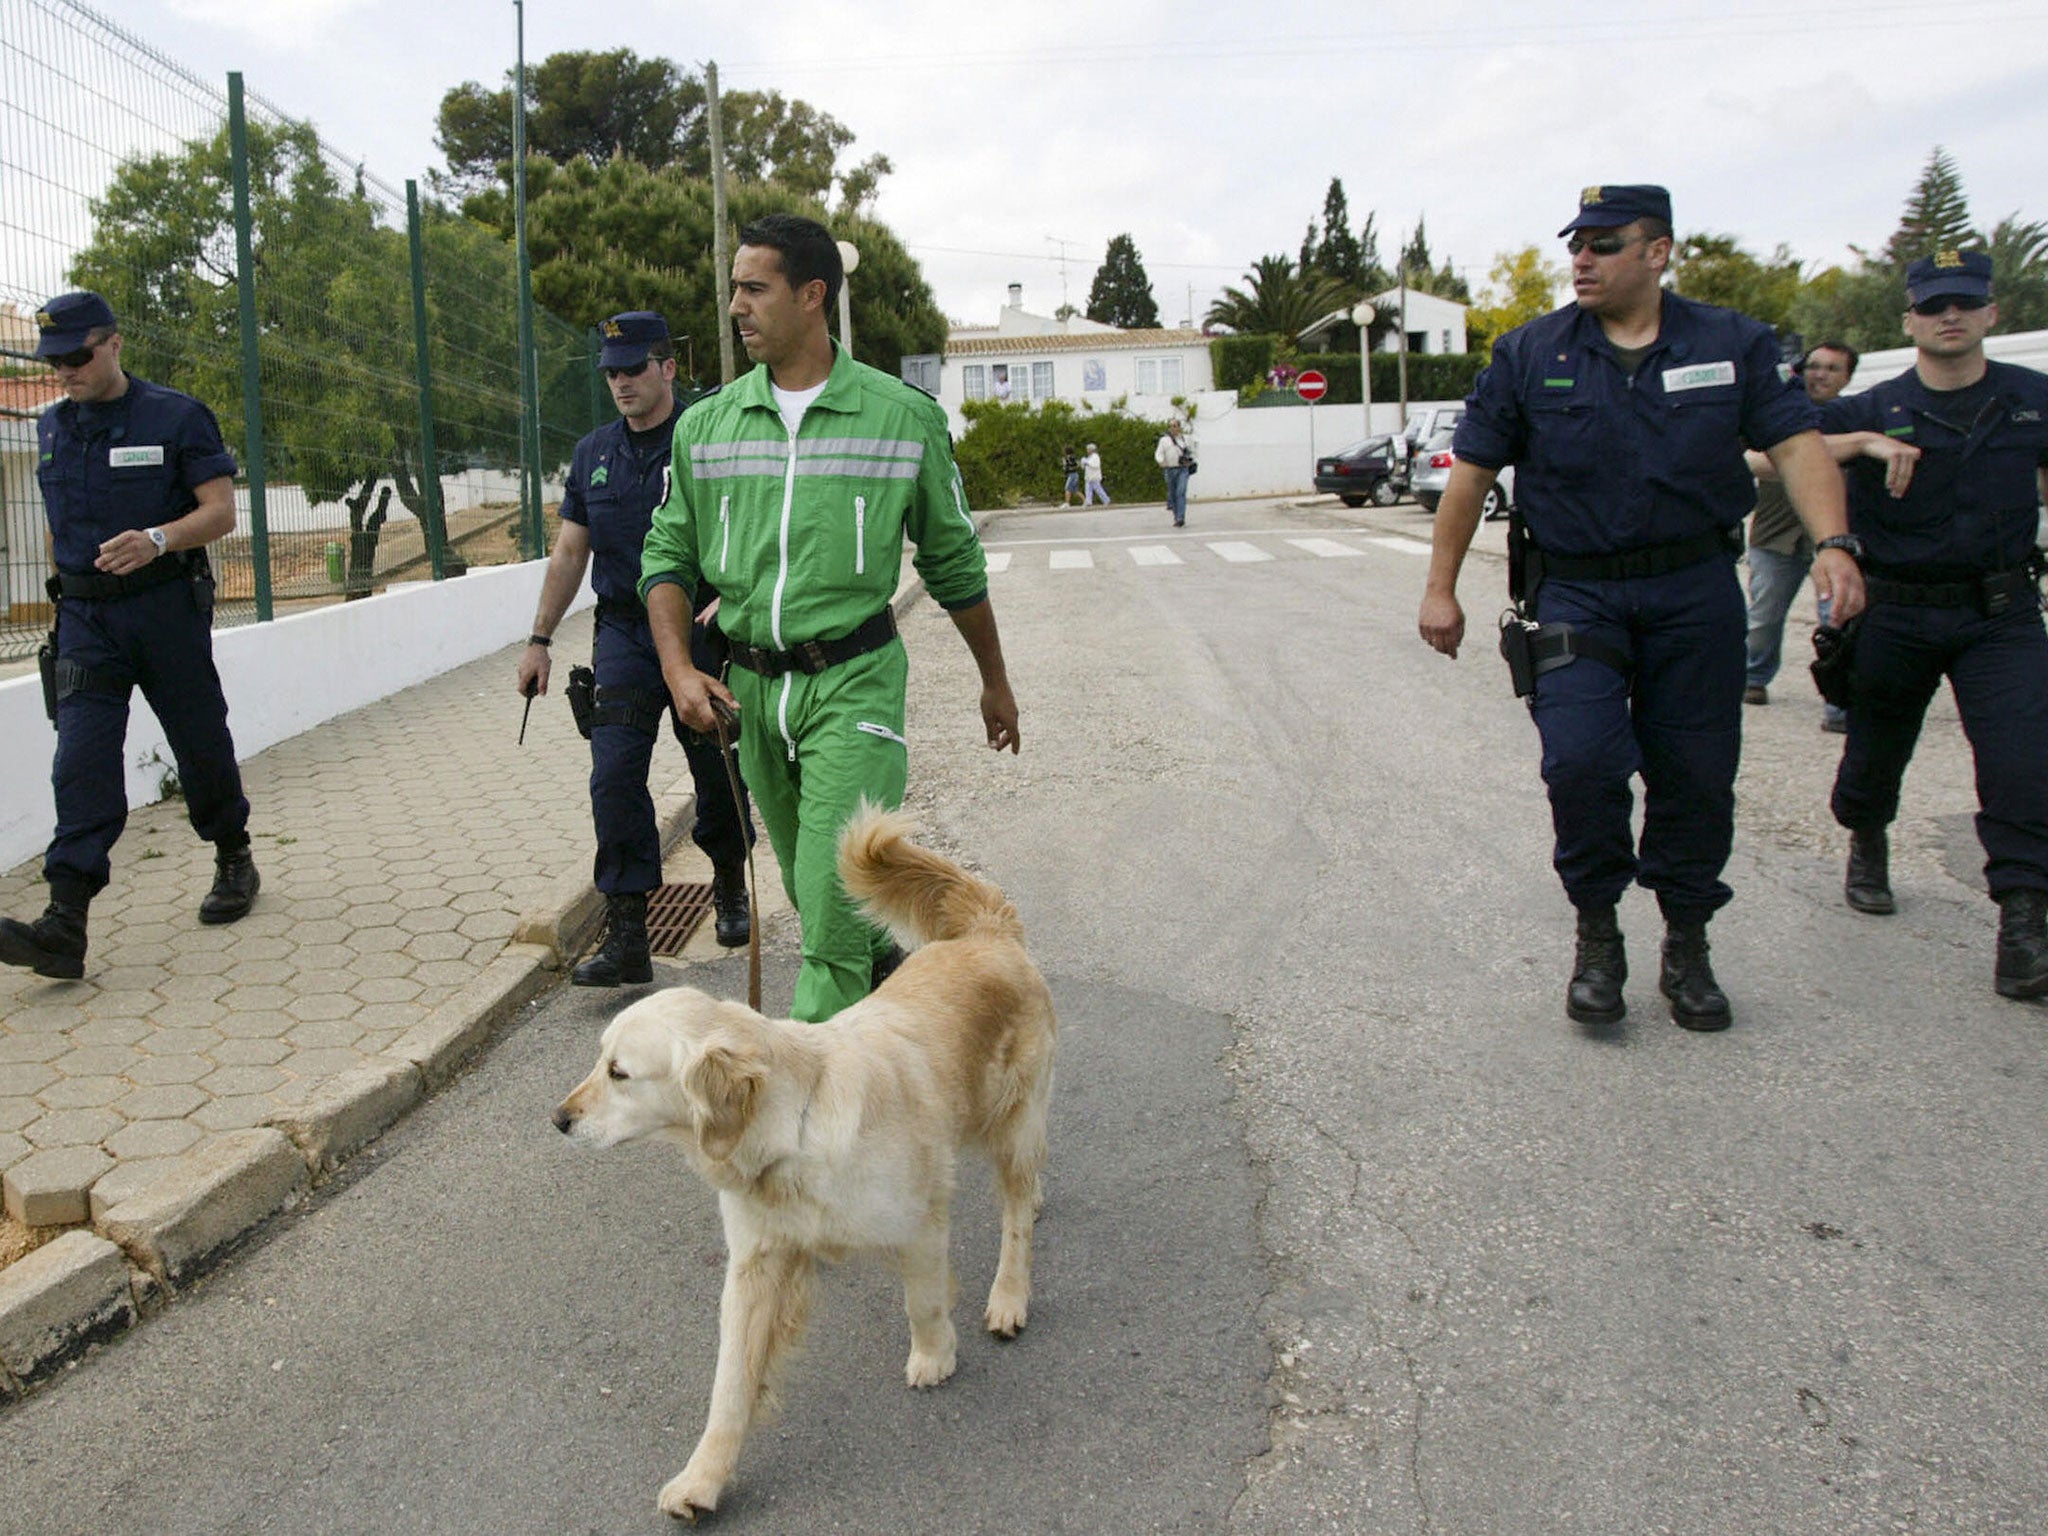 Dozens of Portuguese police carried out the initial search for Madelaine McCann in Praia de Luz when she disappeared in 2007